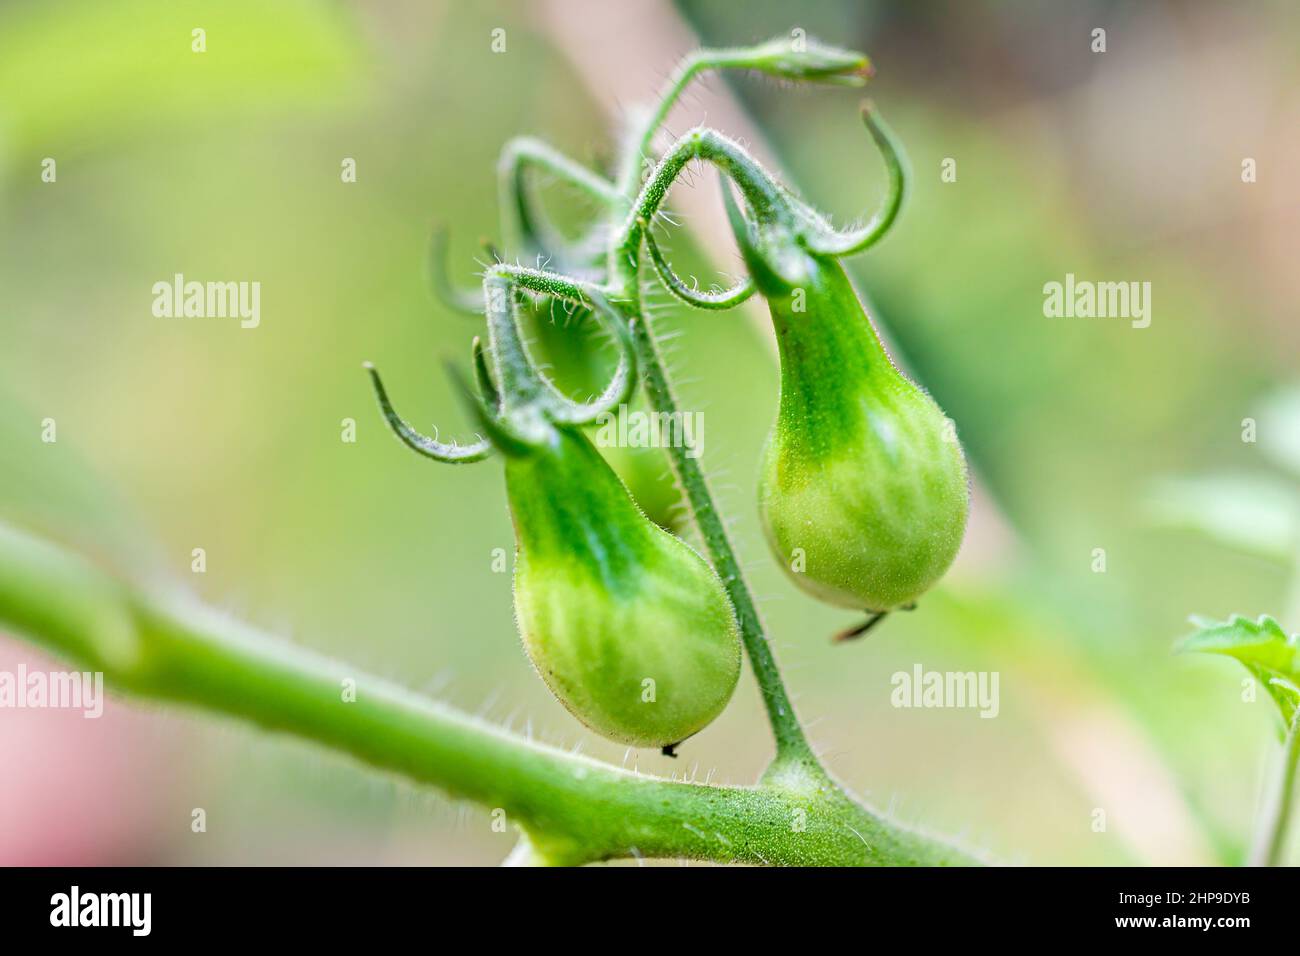 Yellow pear variety of small green unripe cherry tomatoes cluster group hanging growing on plant vine in garden macro closeup Stock Photo